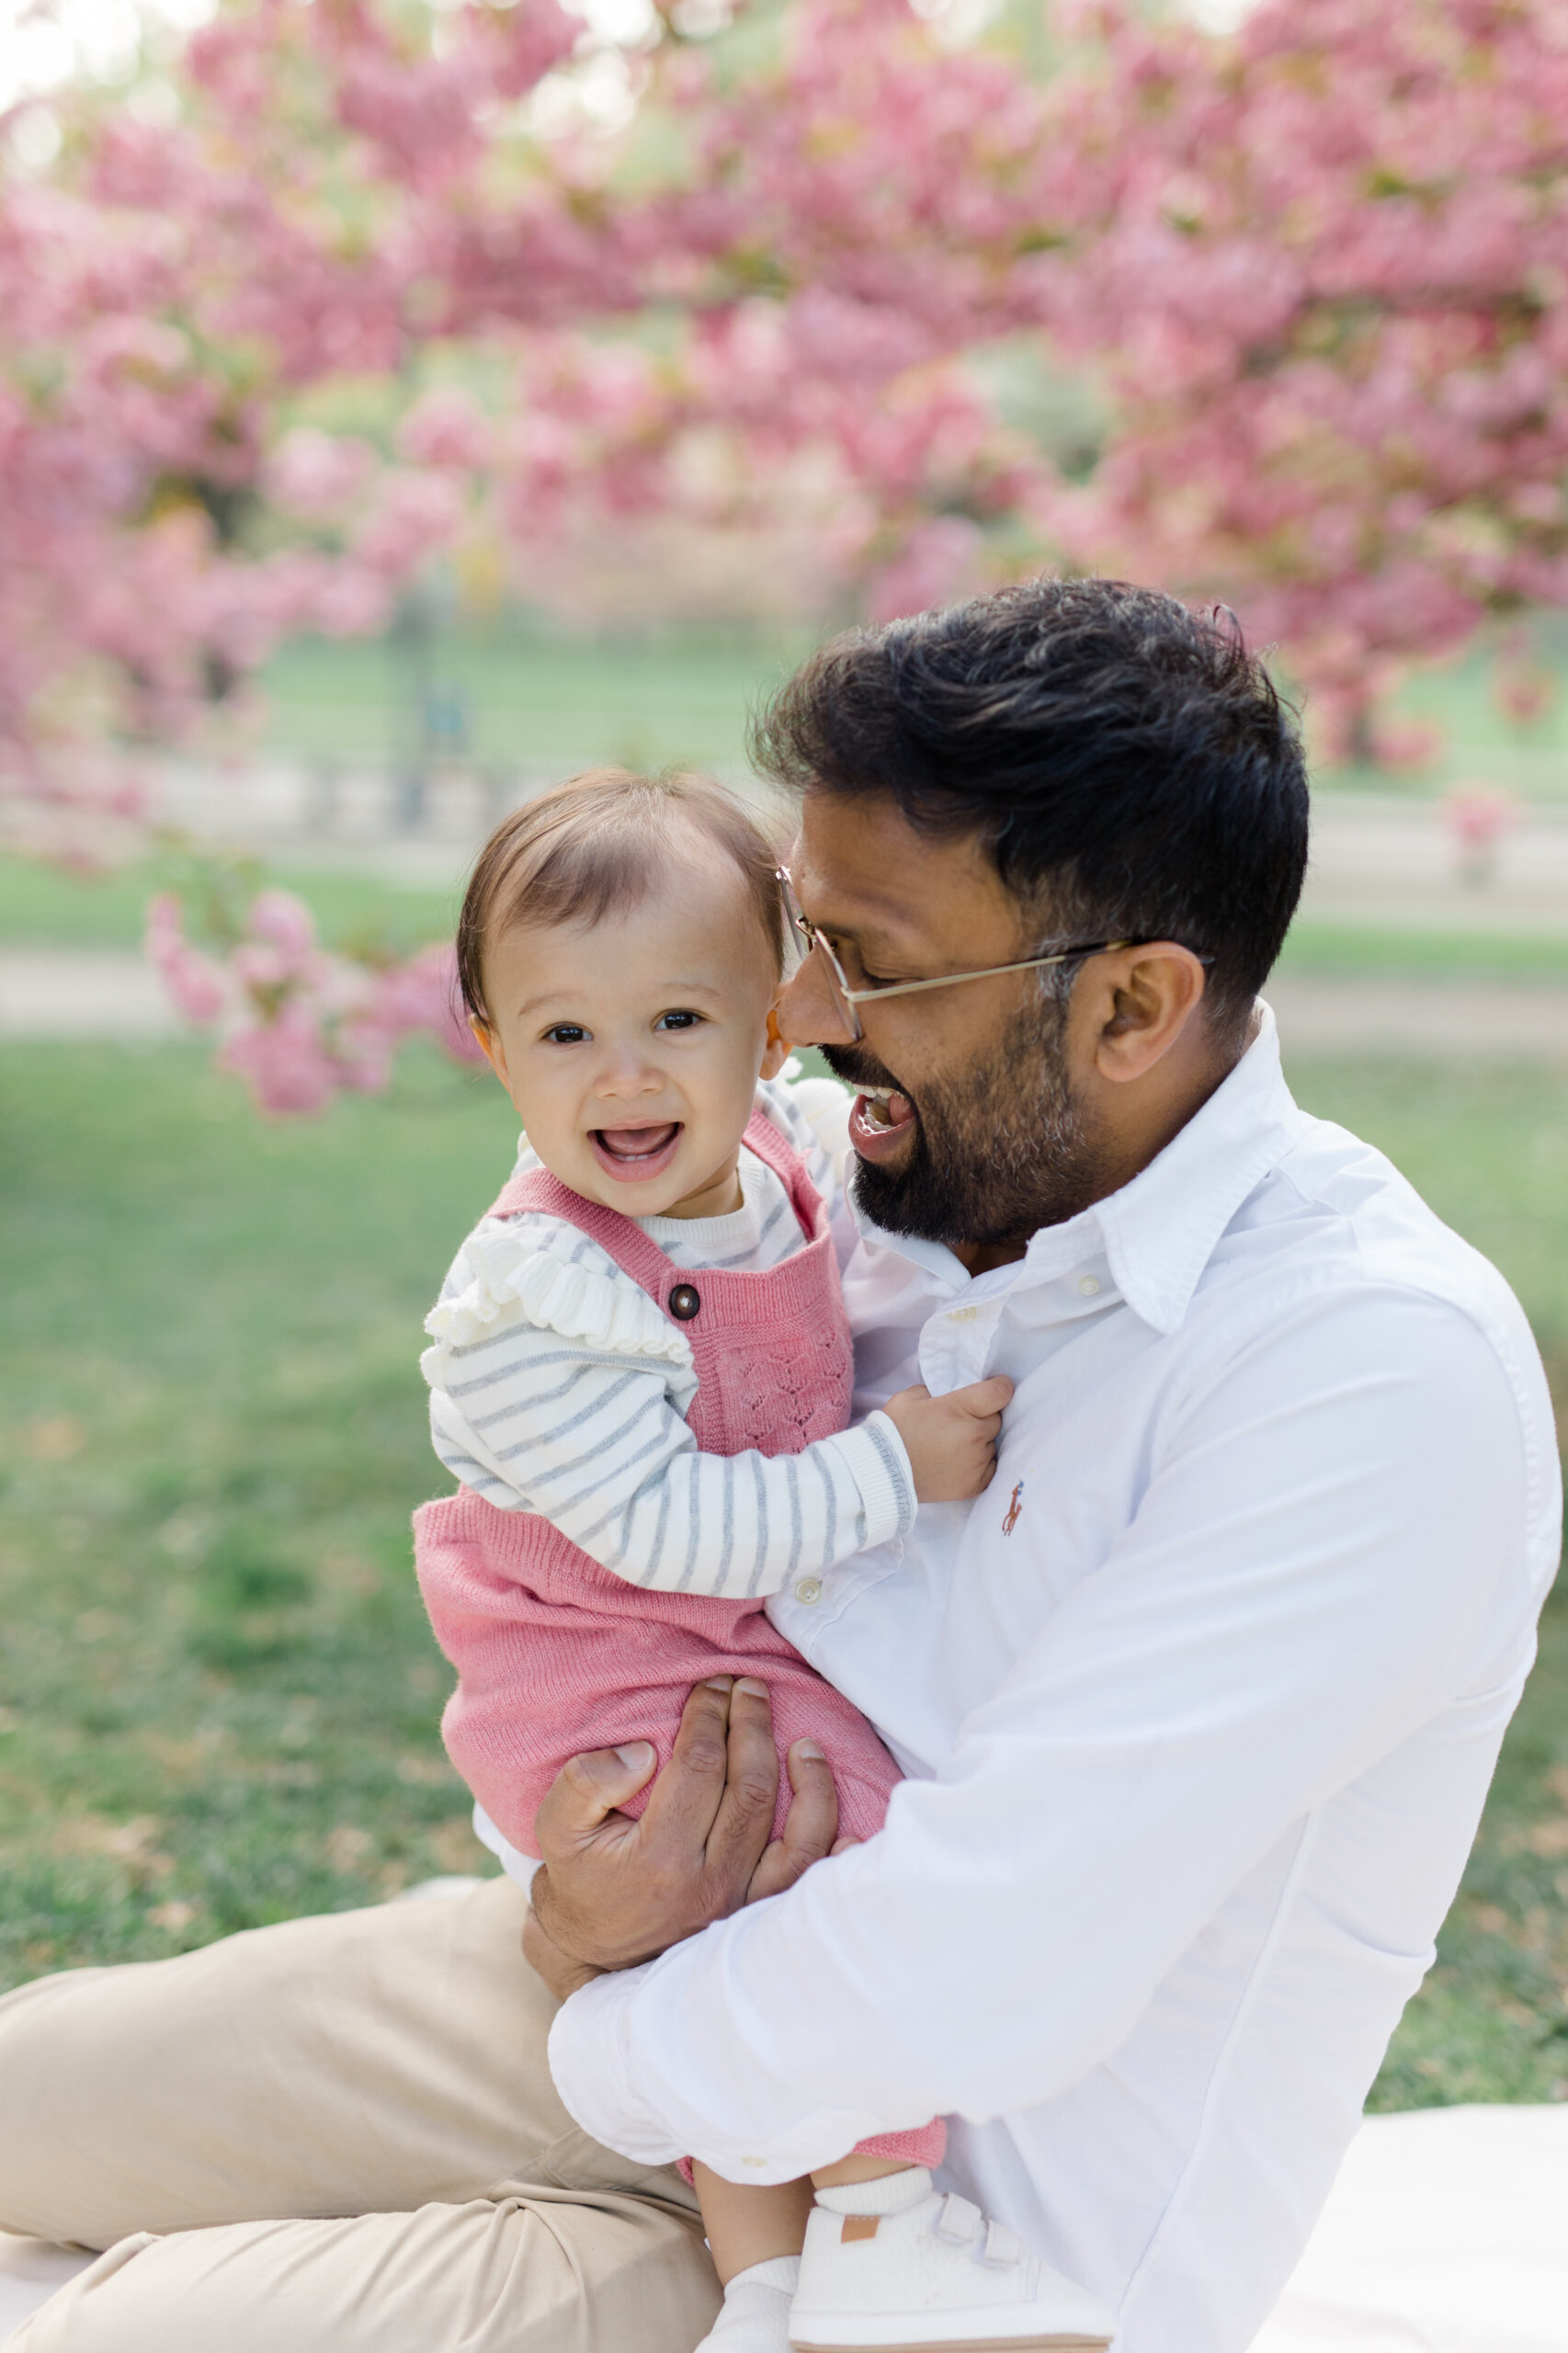 A dad sits holding his baby in front of the cherry blossoms at a spring family mini session in Central Park shot by Jacqueline Clair Photography